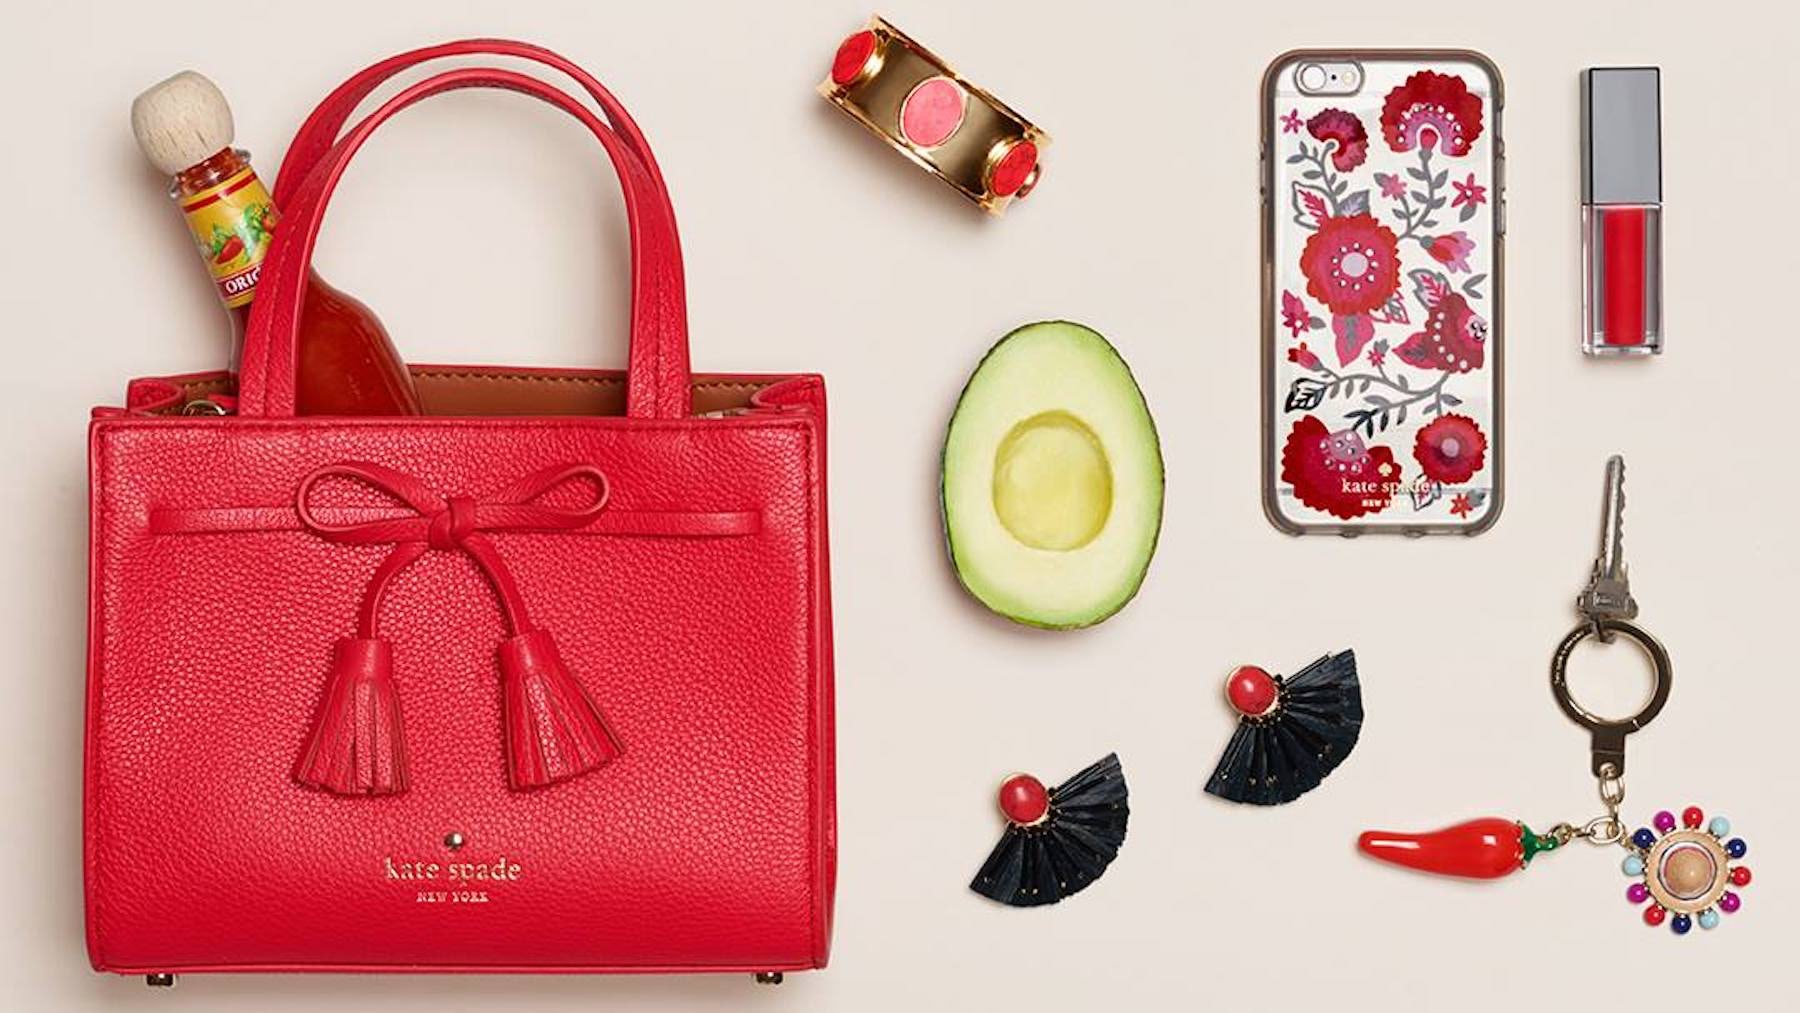 Read Kate Spade News & Analysis | The Business of Fashion